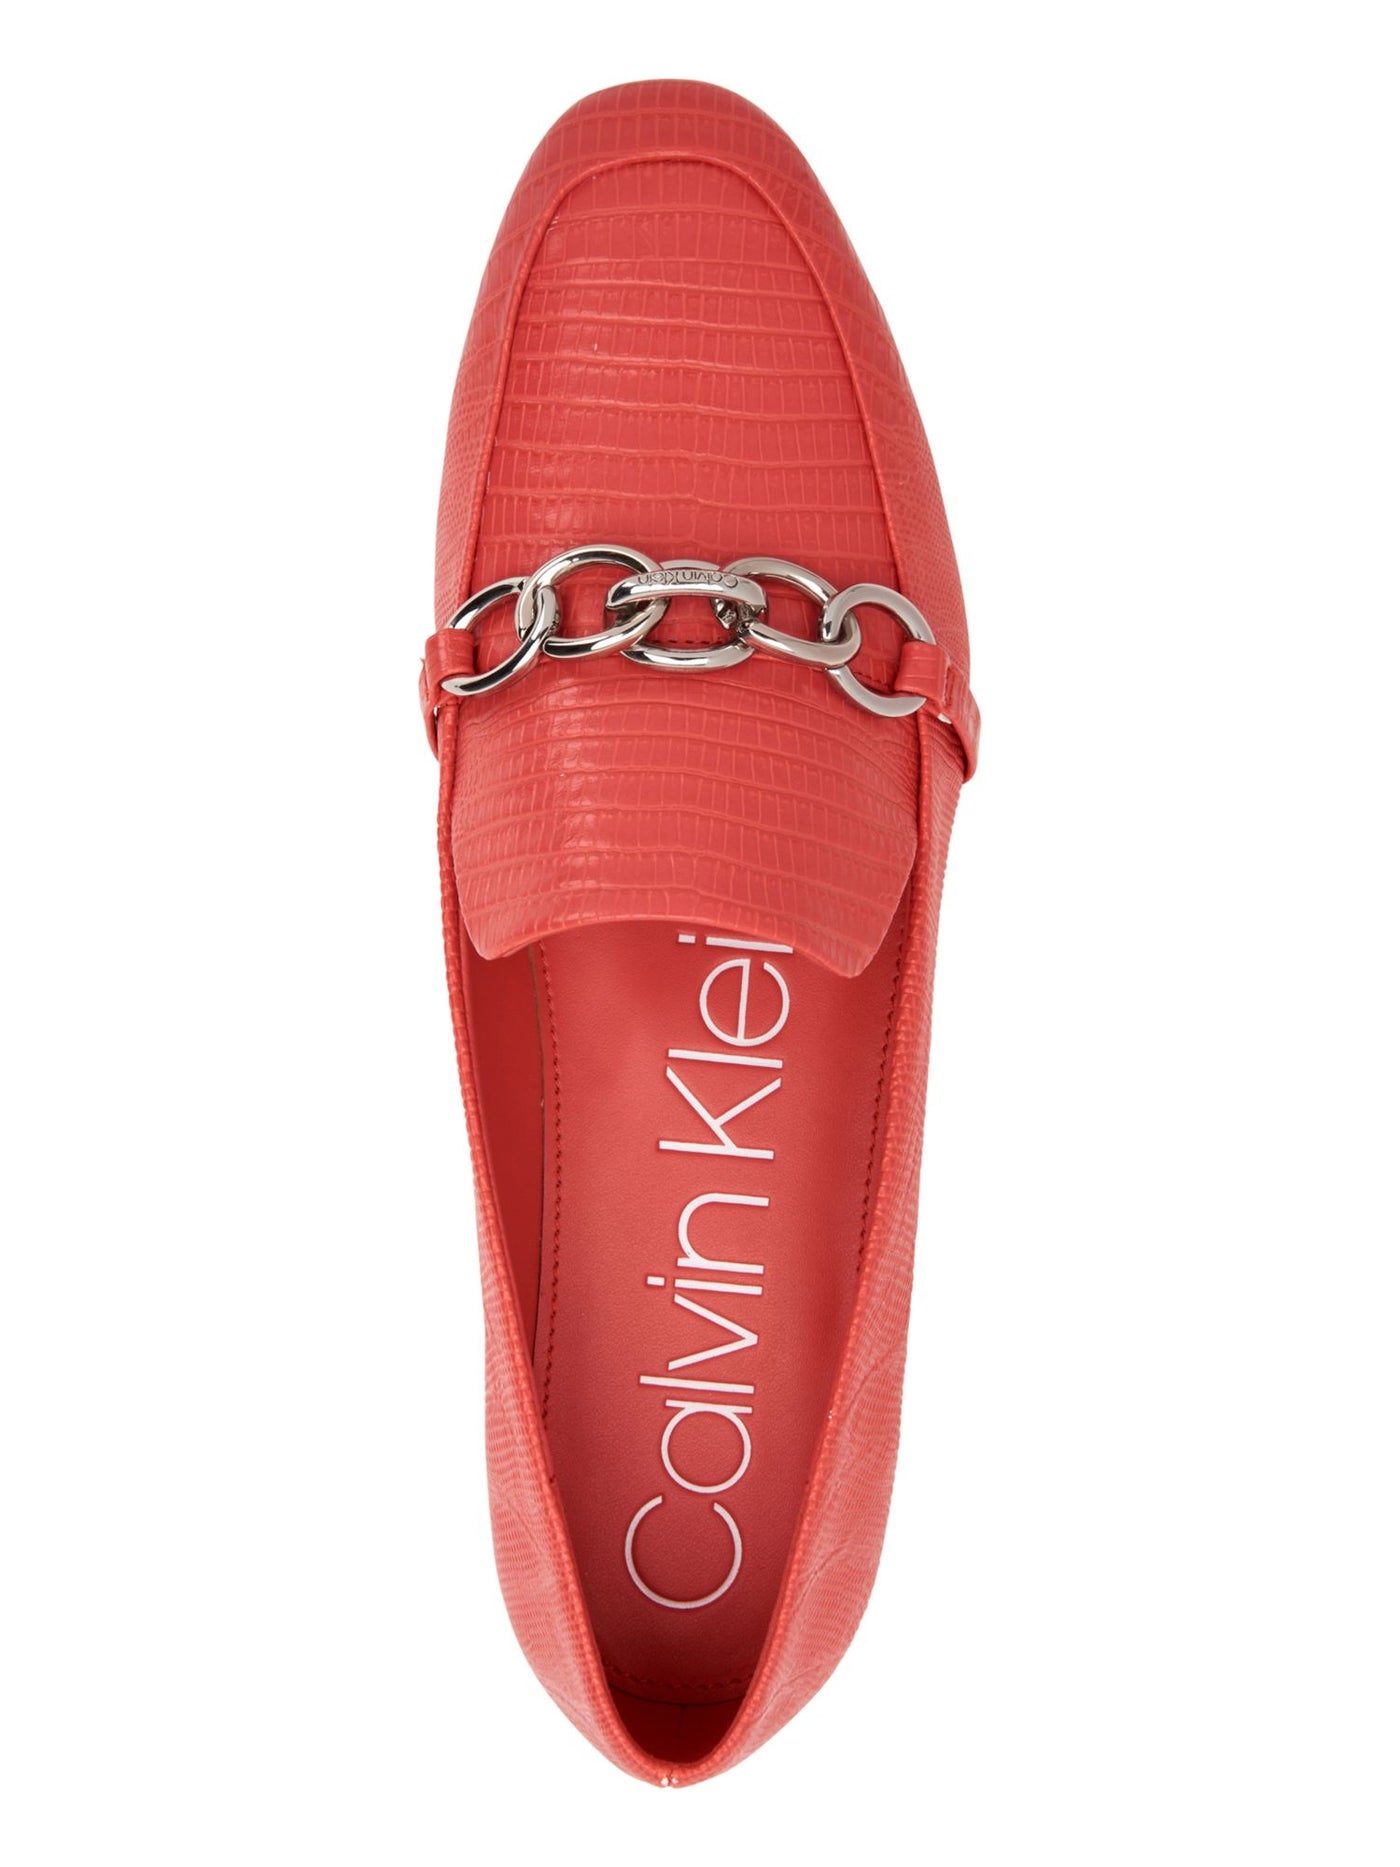 CALVIN KLEIN Womens Coral Signature Chain Link Cushioned Logo Banda Round Toe Slip On Loafers Shoes 11 M